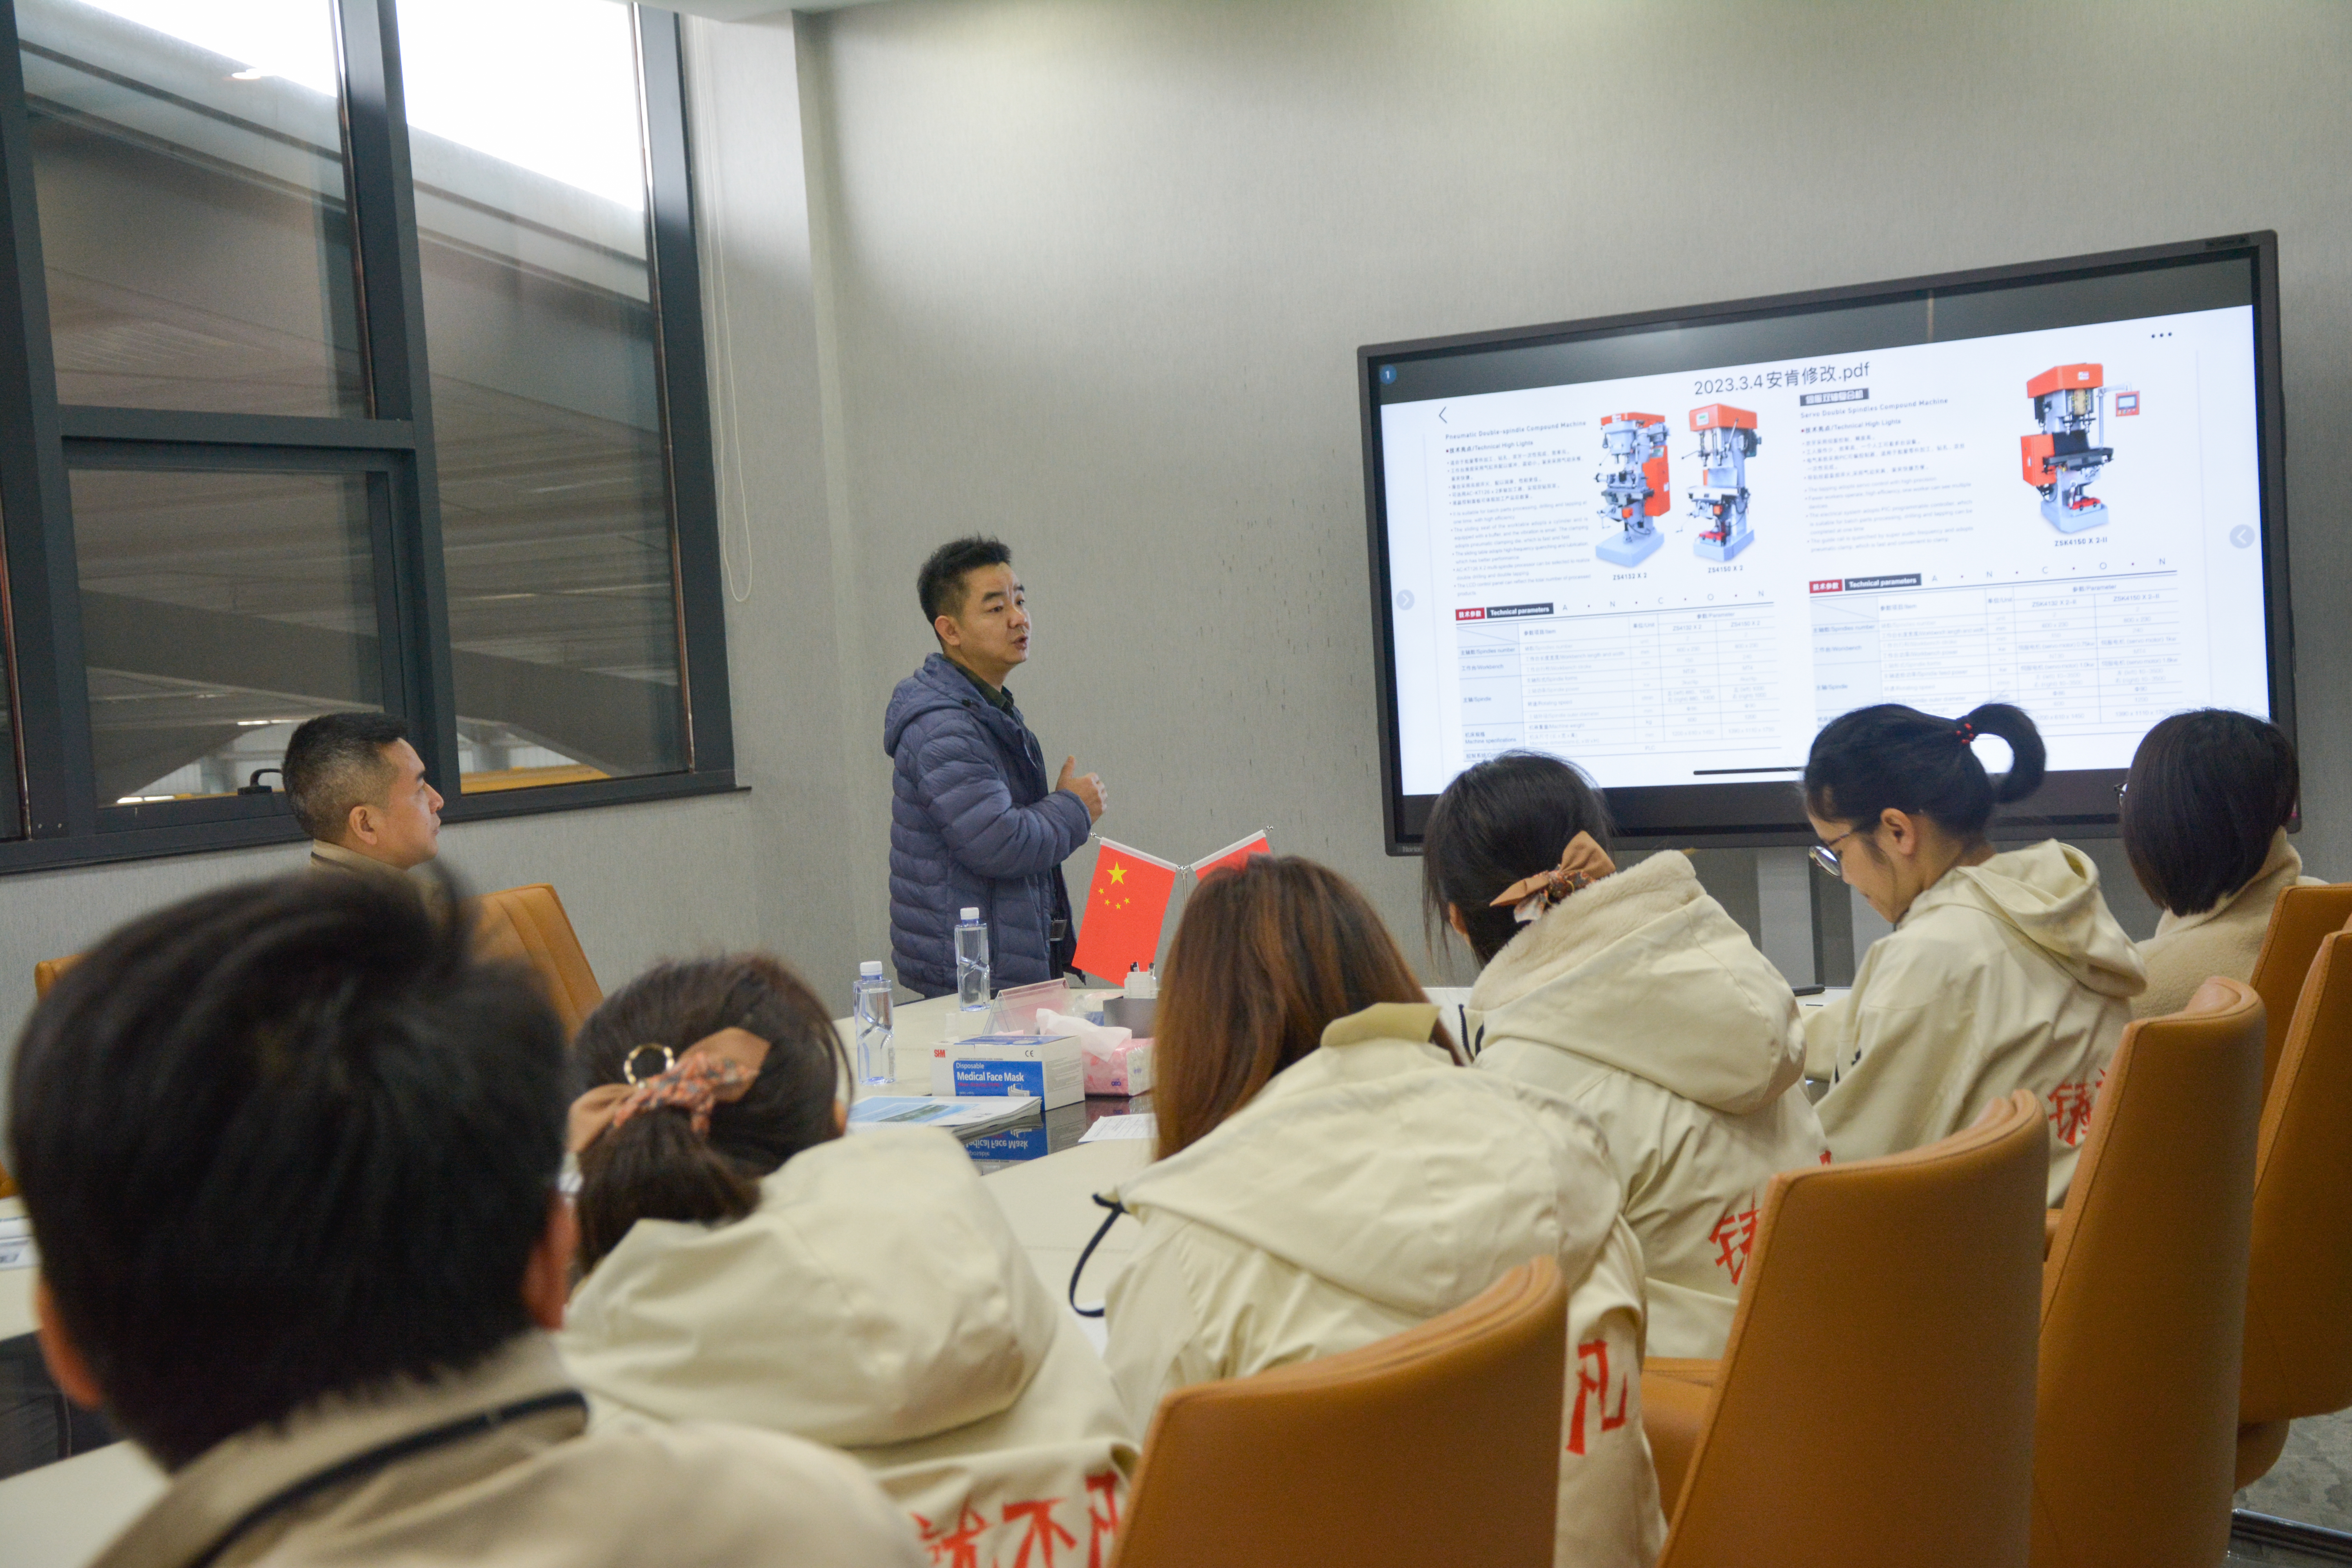 【Delin Information】Practice internal strength and achieve great results! The technical internal training of Delin Intelligent Marketing Team ended successfully!